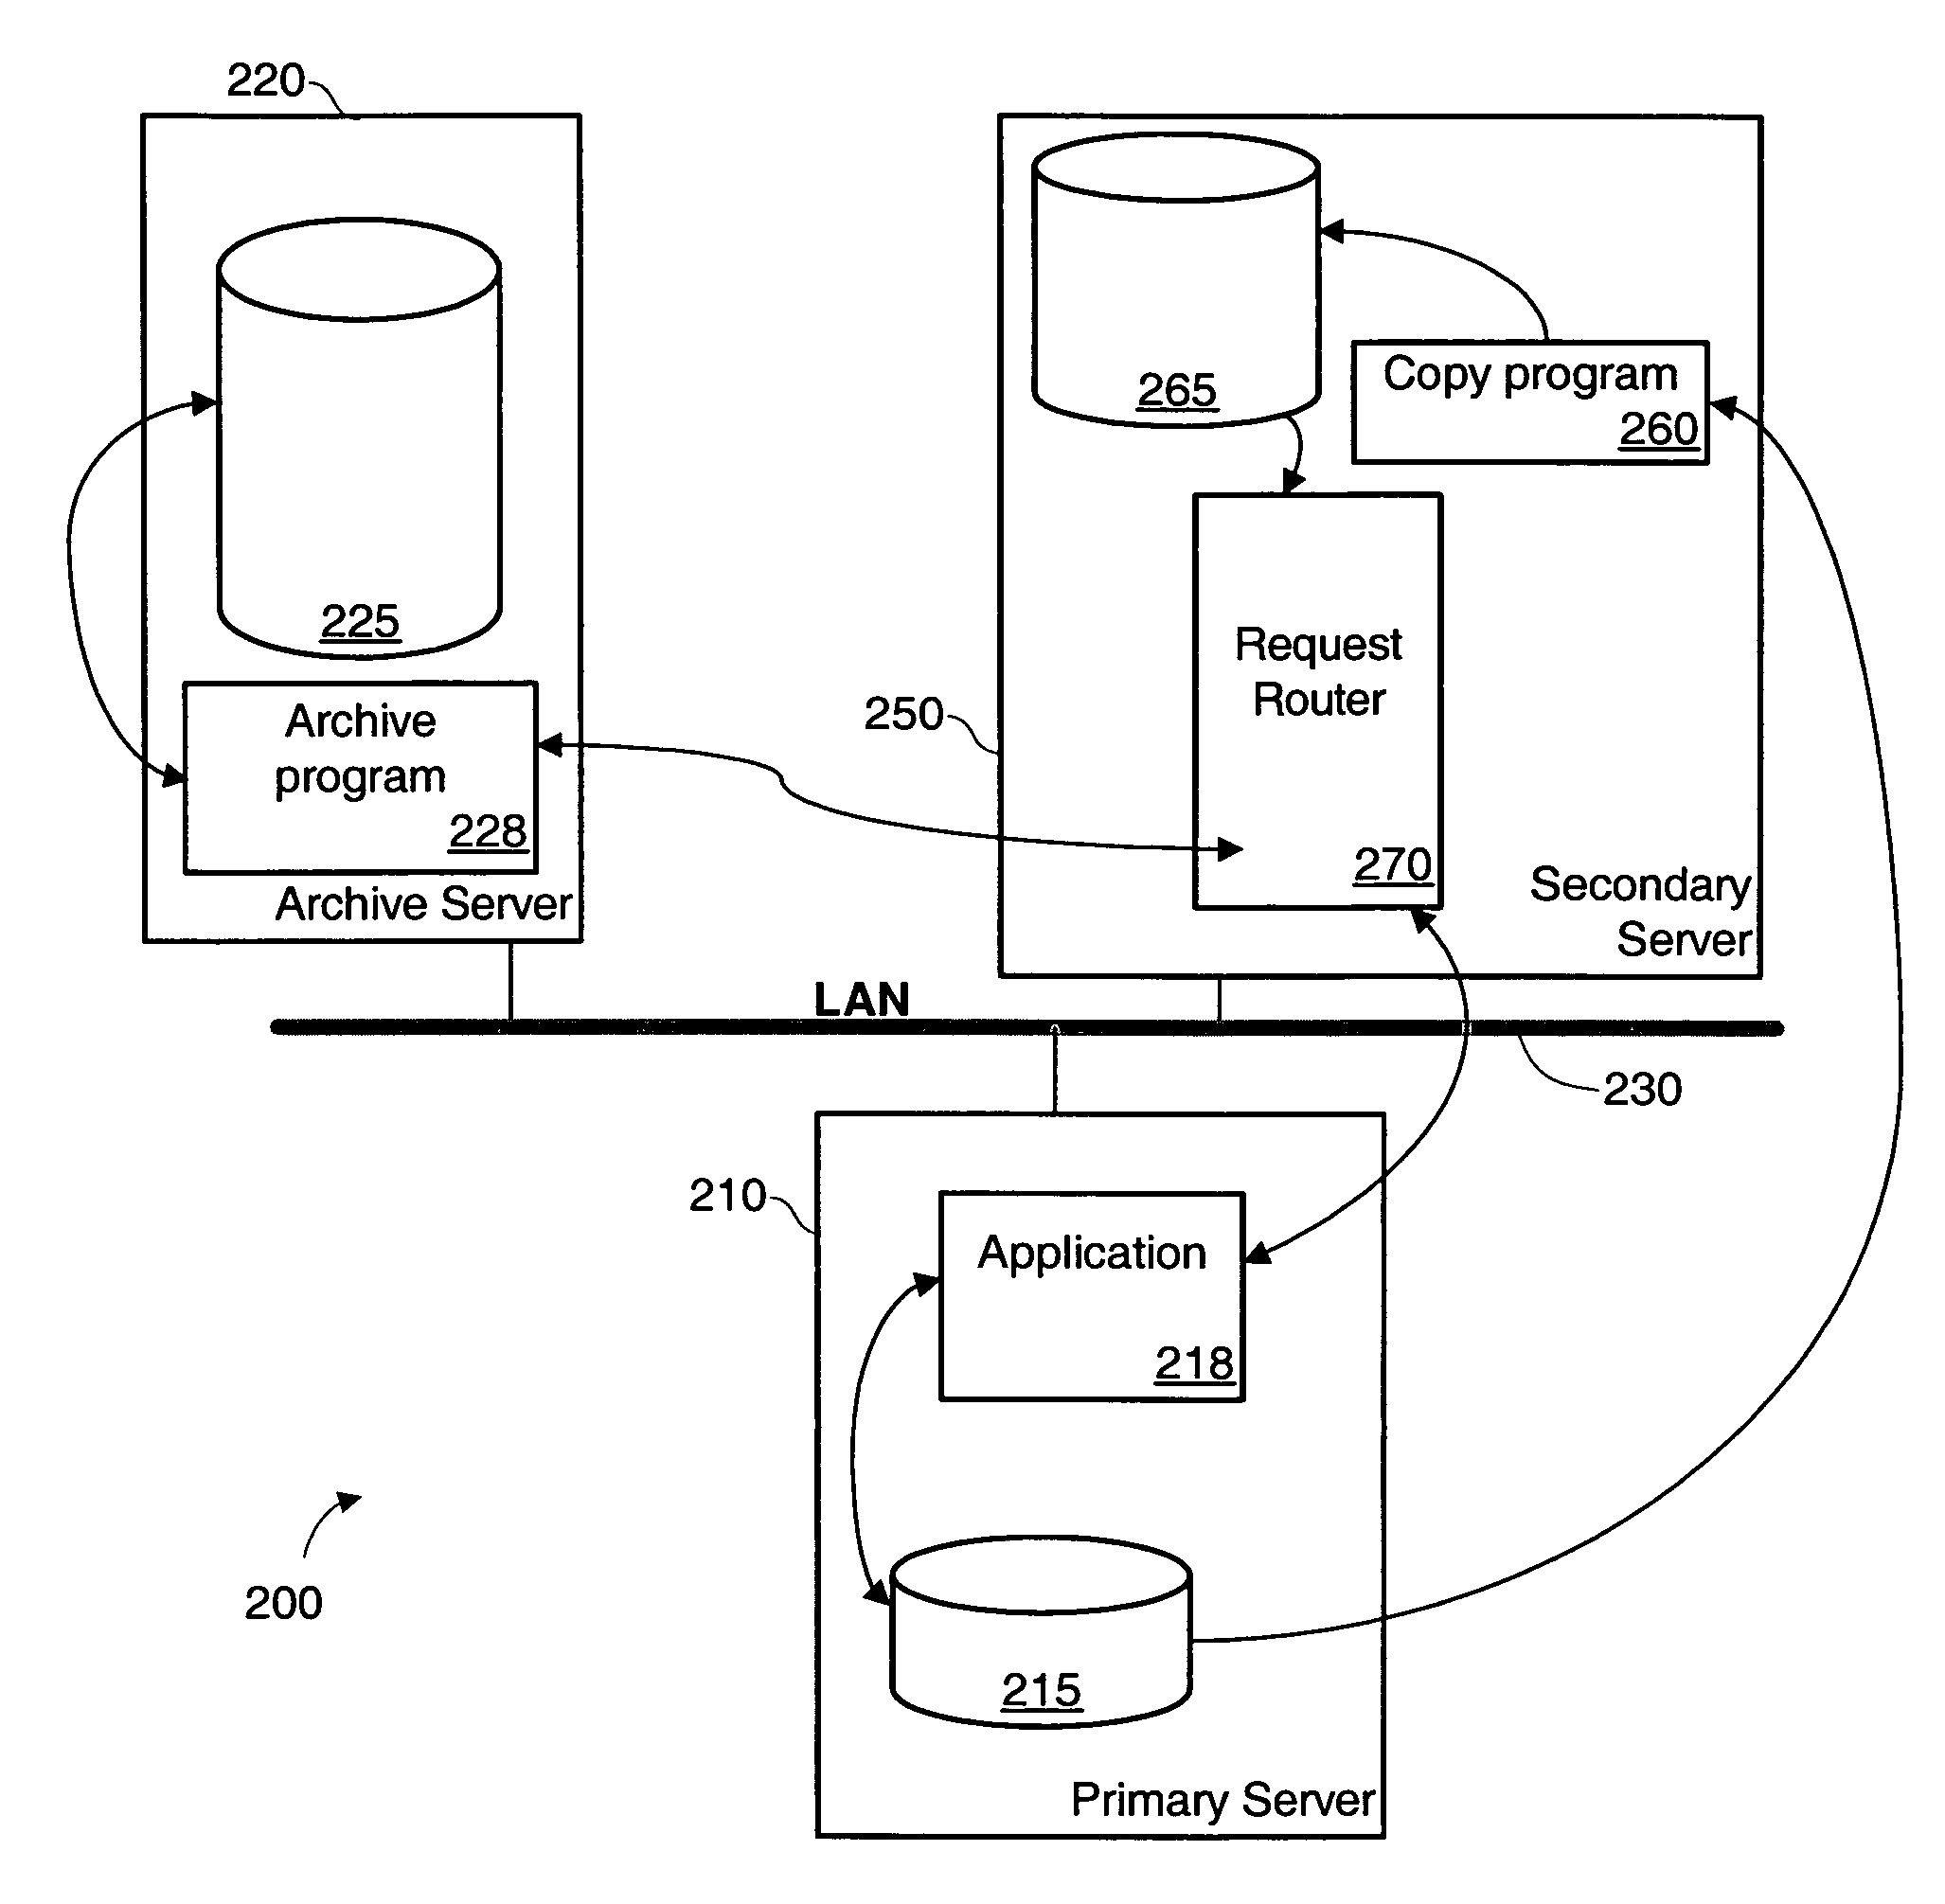 Method and system to offload archiving process to a secondary system